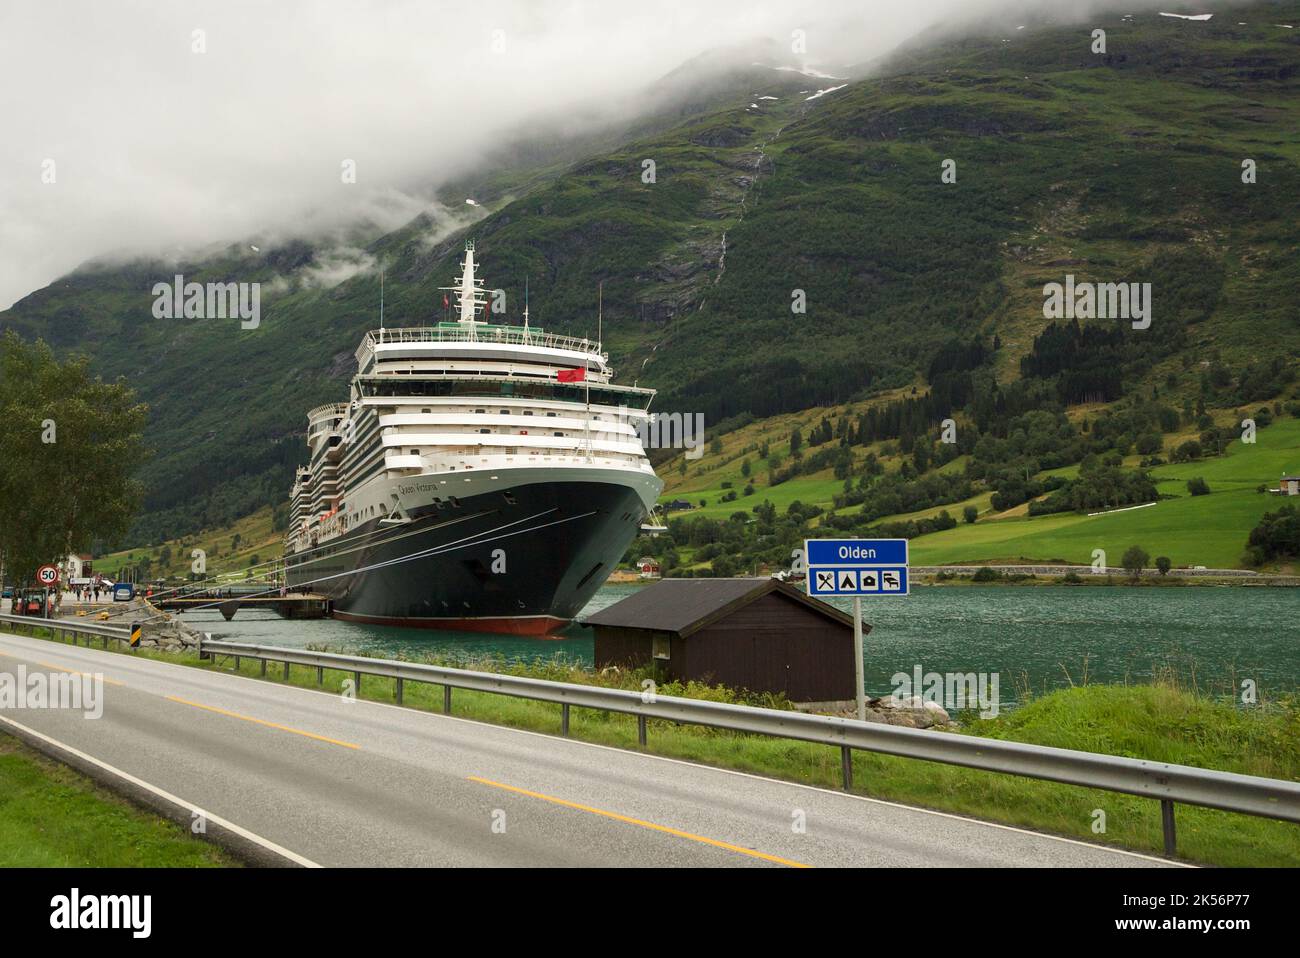 Queen Victoria cruise ship, a Cunard cruise docked in the dock of Olden, Stryn, Vestland county, Norway. Cunard Queen Victoria, Norwegian Fjords. Stock Photo